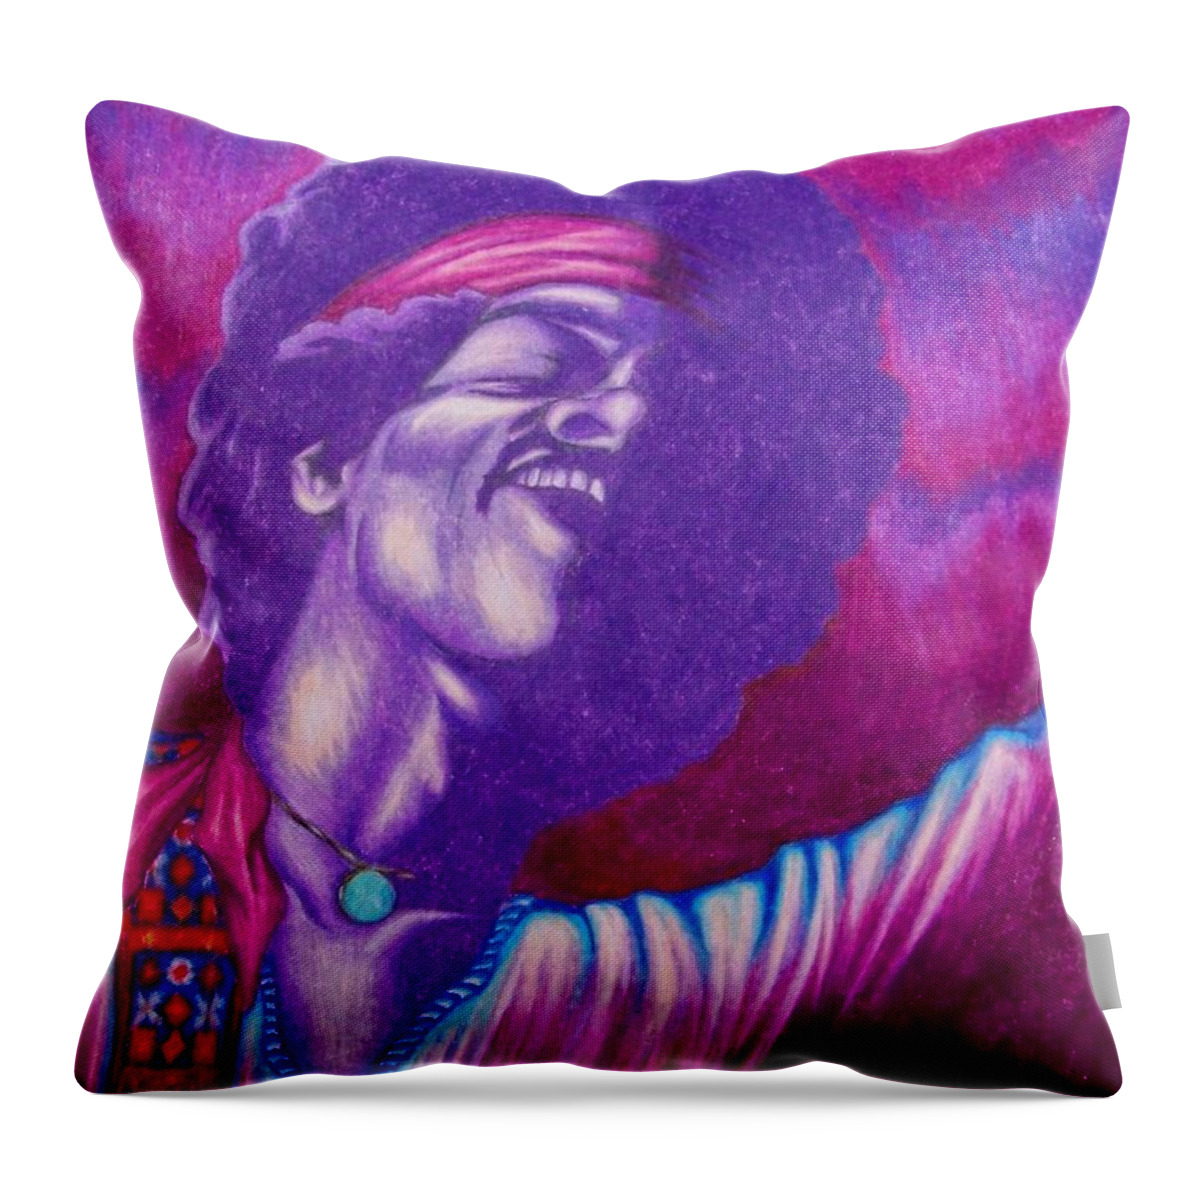 Michael Throw Pillow featuring the drawing Haze by Michael TMAD Finney